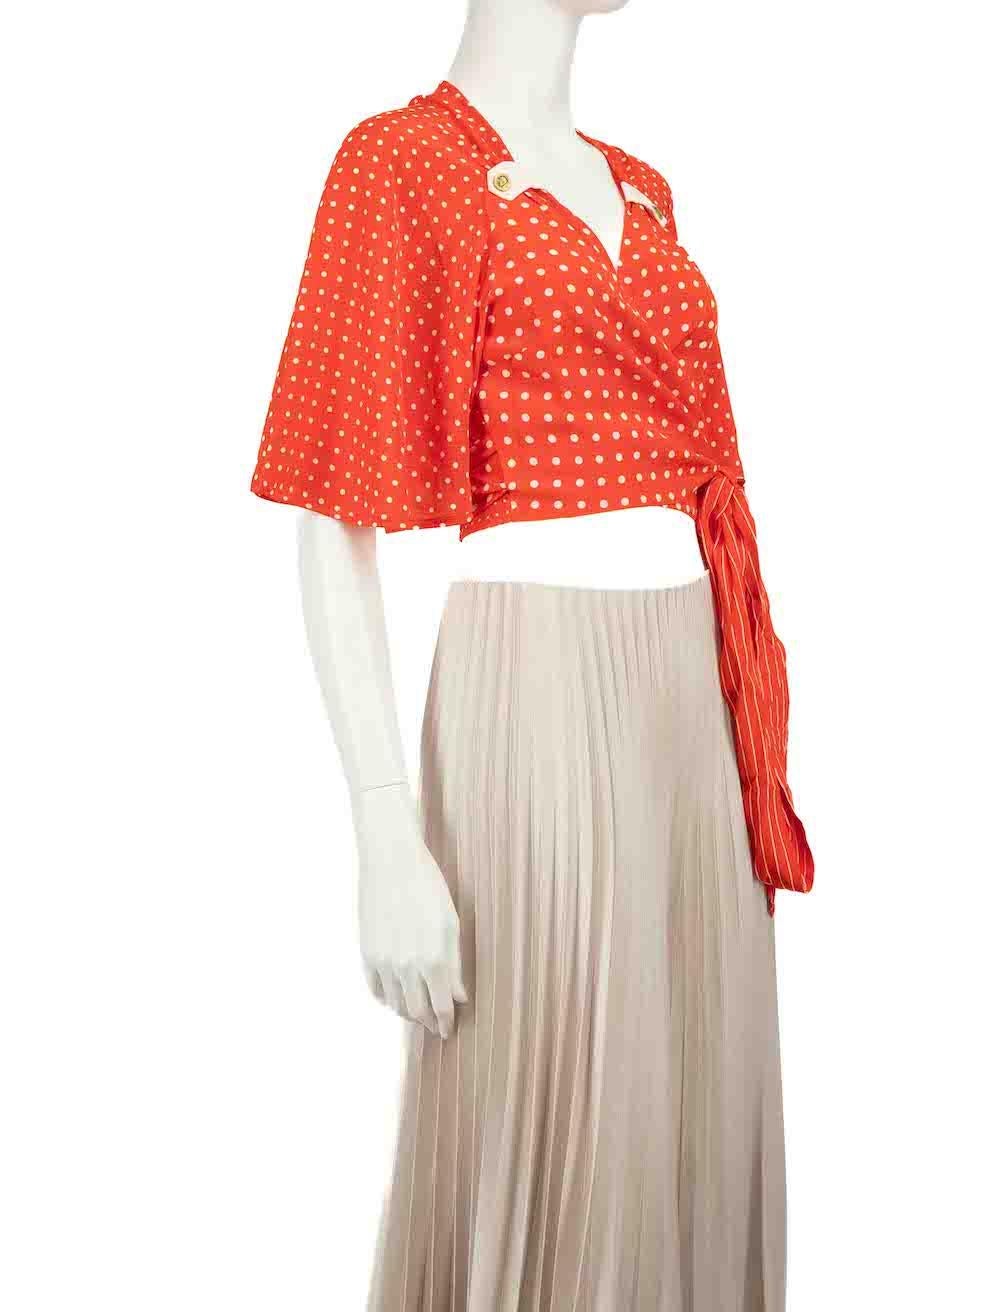 CONDITION is Never worn. No visible wear to wrap top is evident on this new Zimmermann designer resale item.
 
 
 
 Details
 
 
 Red
 
 Silk
 
 Mid sleeves top
 
 Polkadot pattern
 
 Wrap tie around closure
 
 V neckline
 
 Cropped length
 
 
 
 
 
